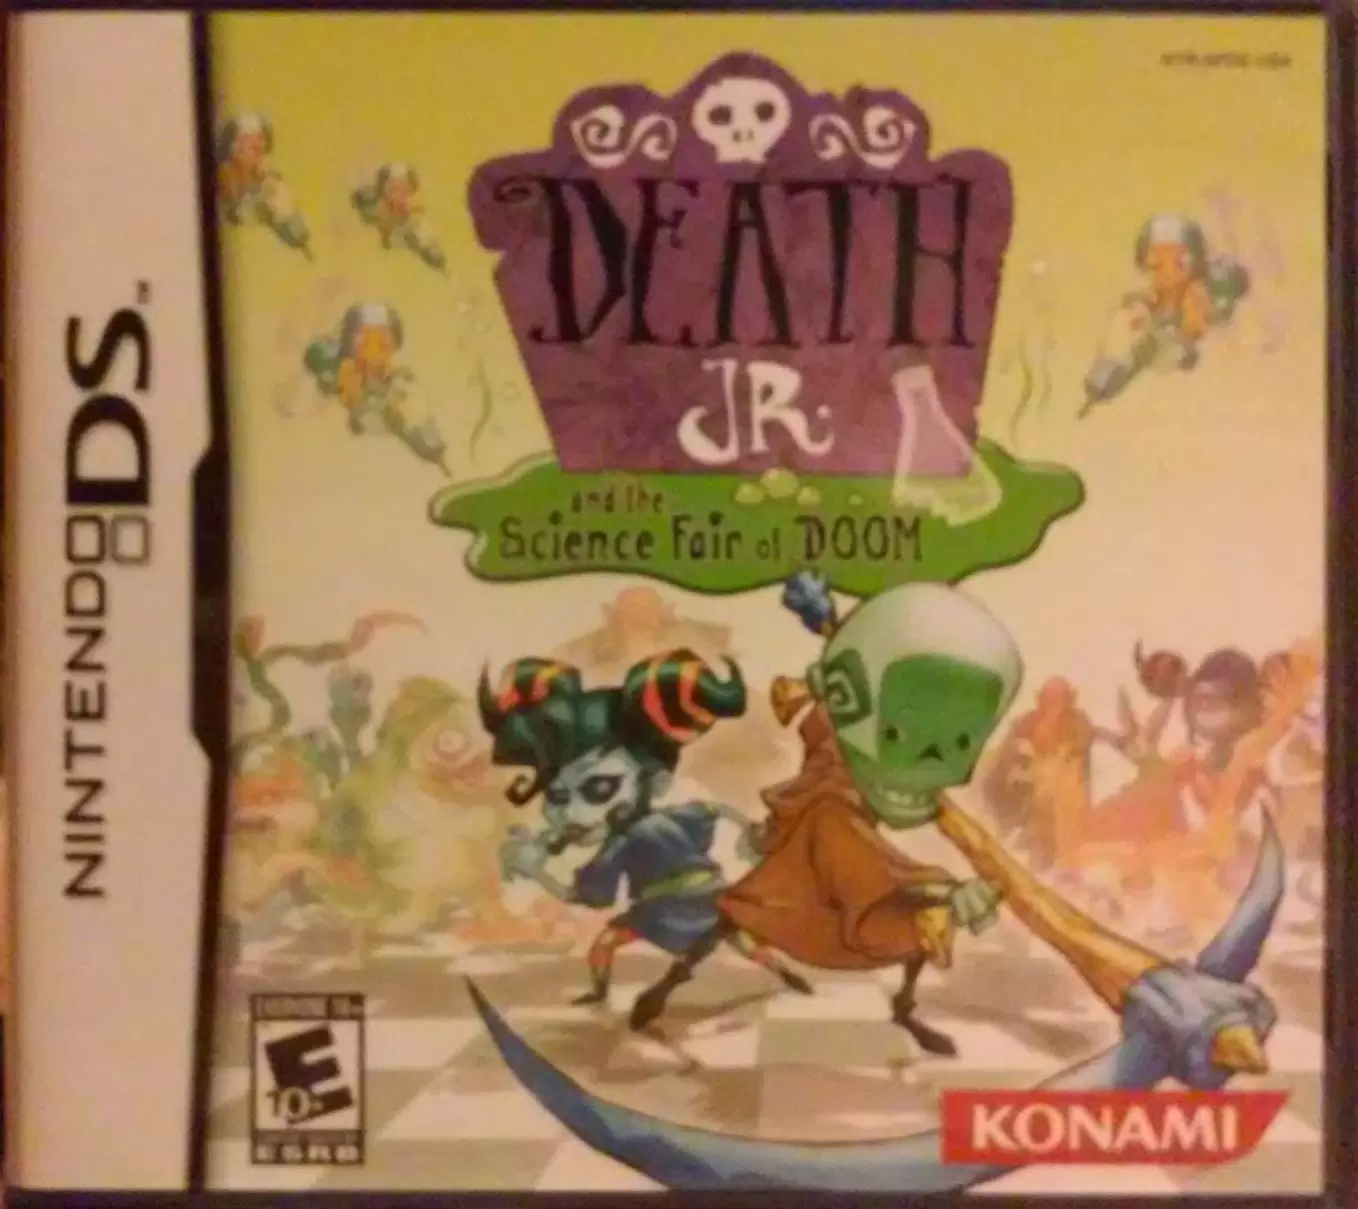 Nintendo DS Games - Death Jr. and the Science Fair of Doom